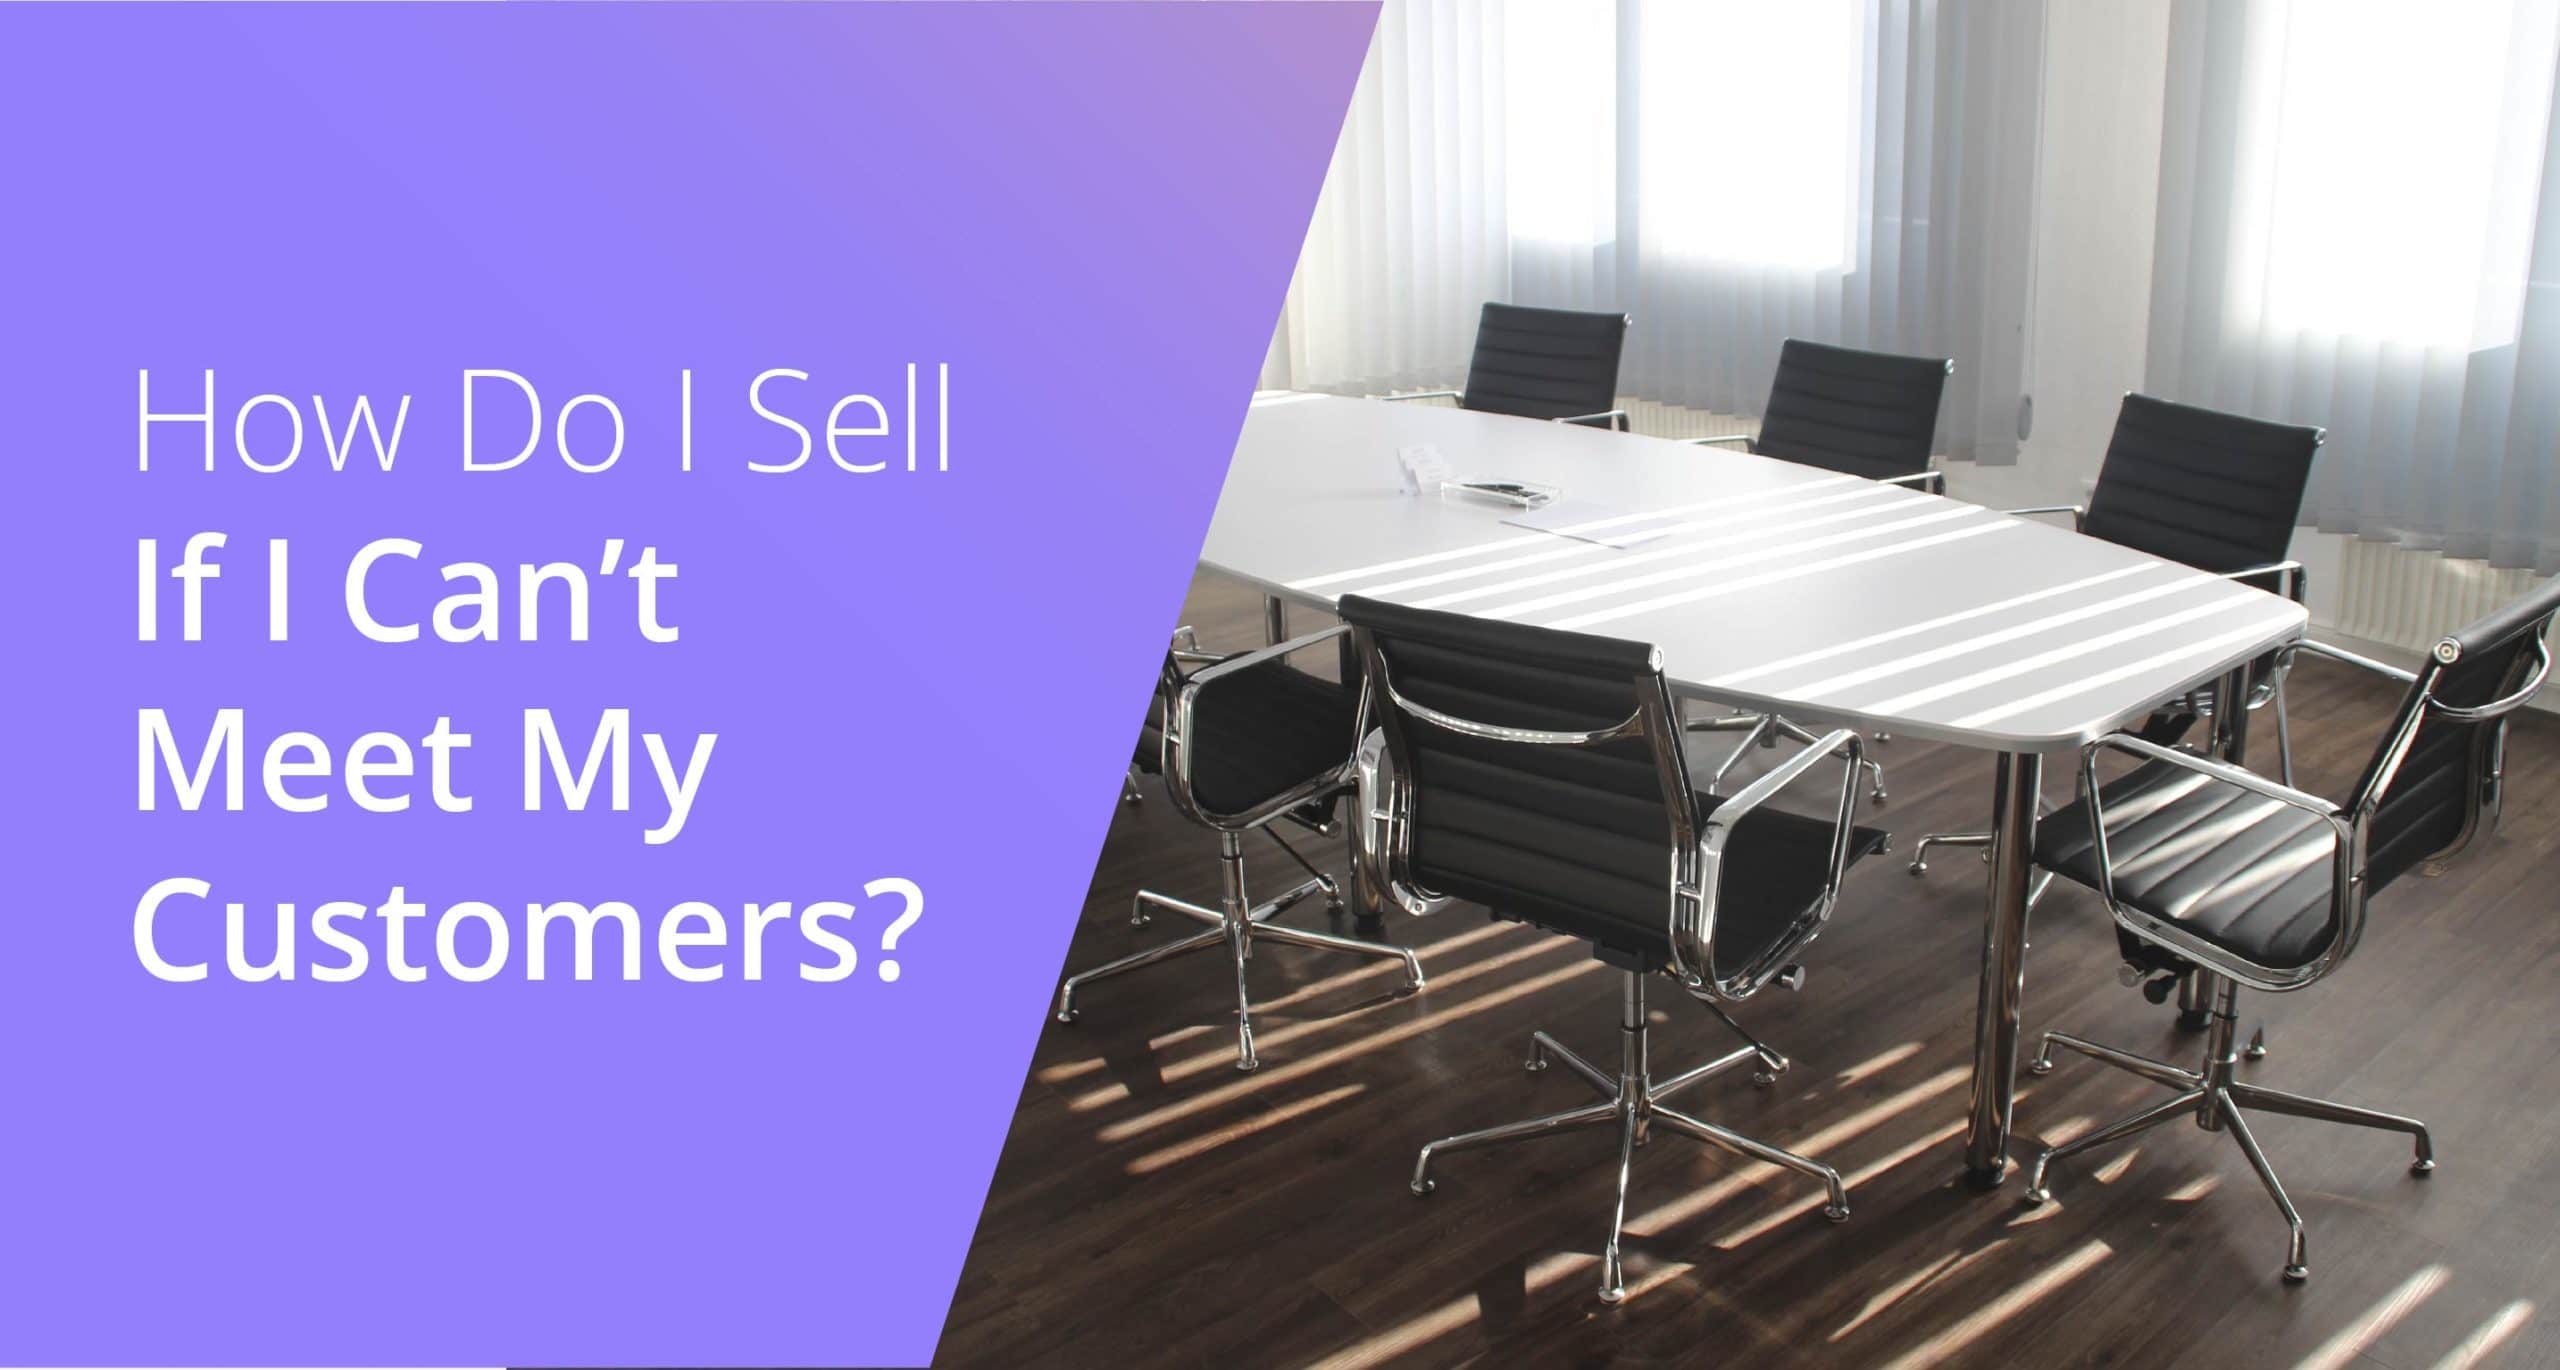 How Do I Sell If I Can’t Meet My Customers?